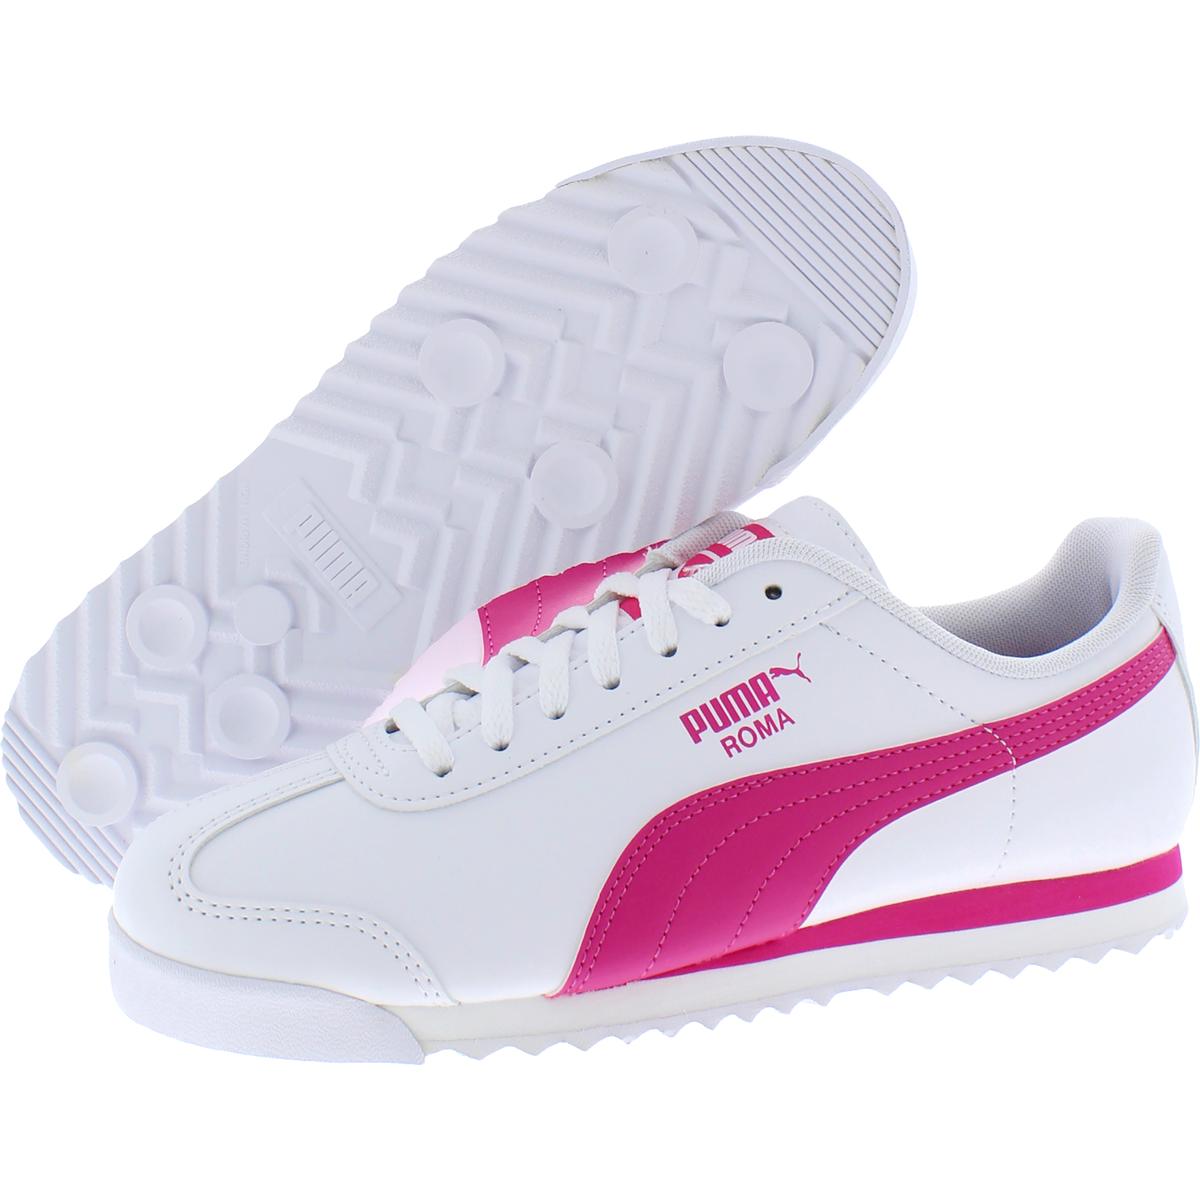 Puma Girls Roma Basic Jr Faux Leather Solid Trainers Sneakers Shoes ...